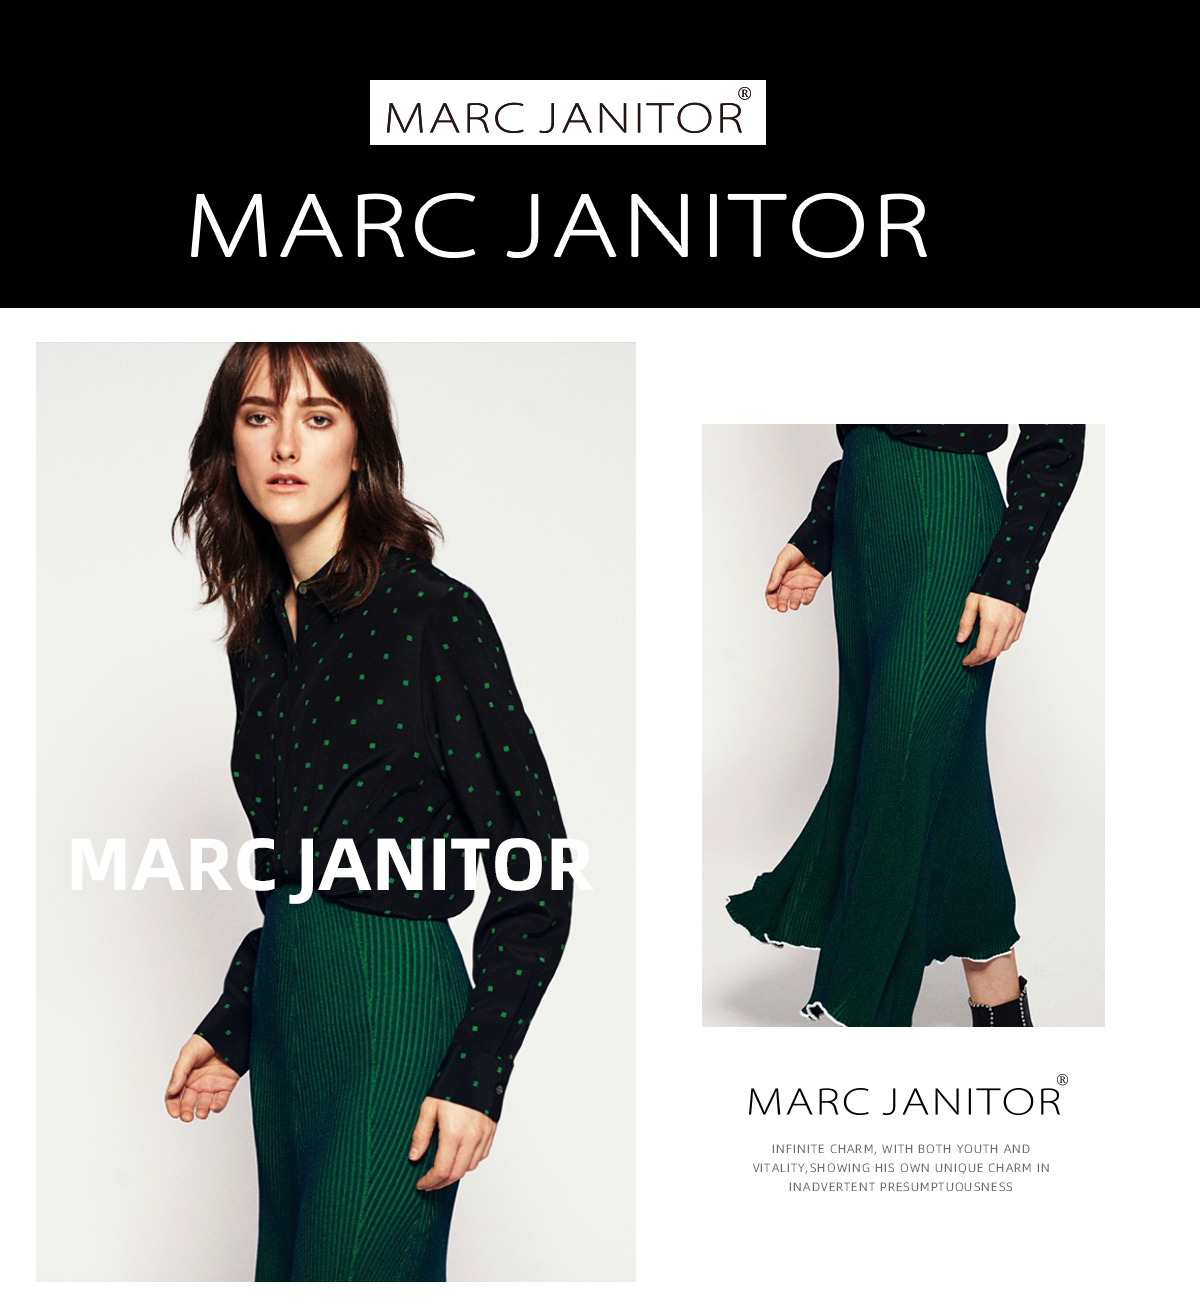 MARC JANITOR